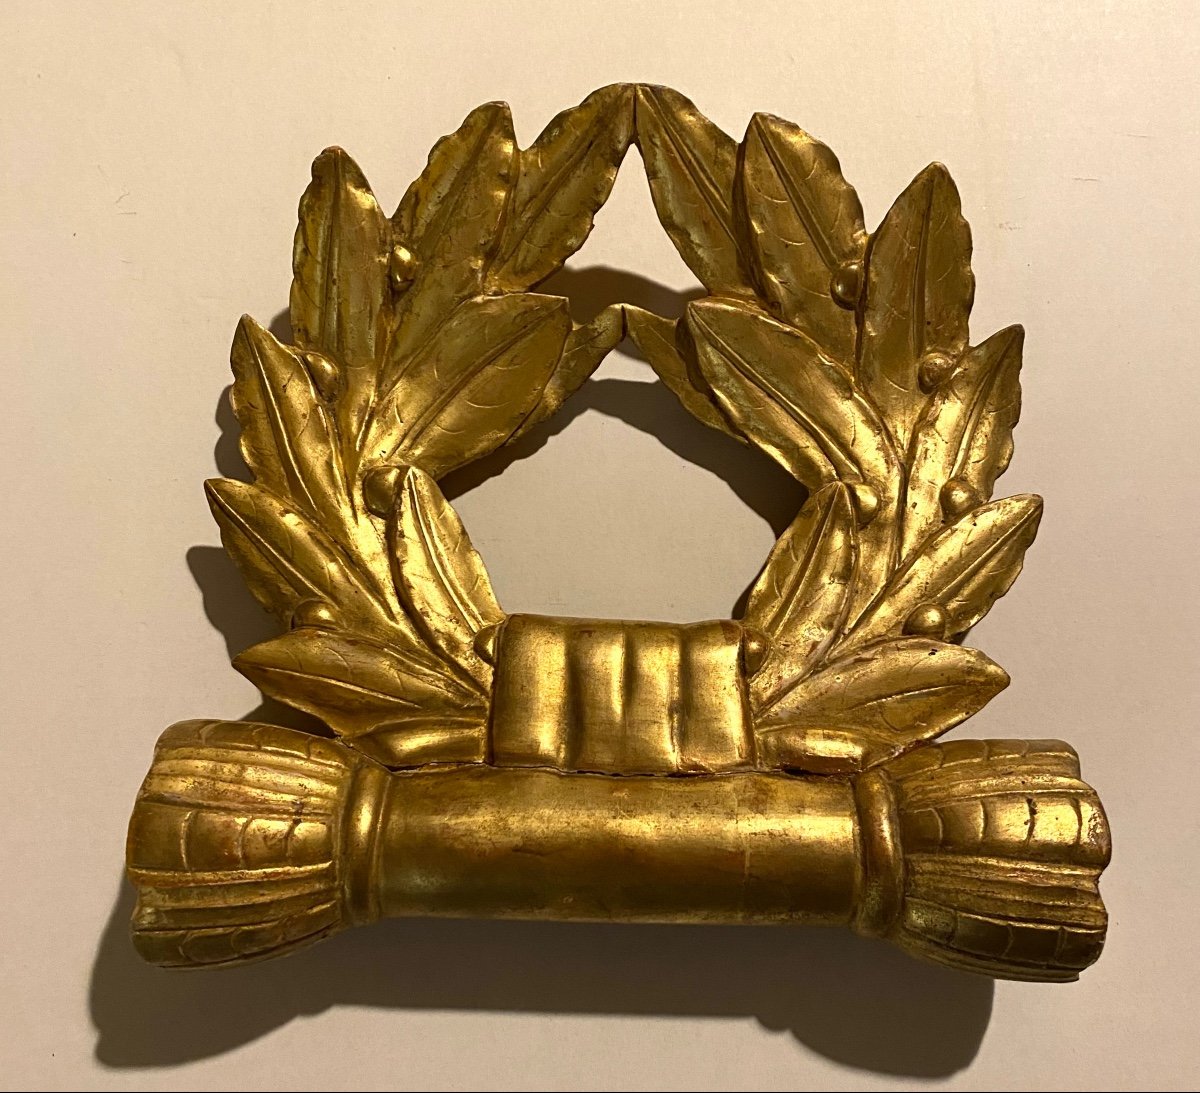 Laurel Wreath. Carved And Gilded Wood. Early 19th Century.